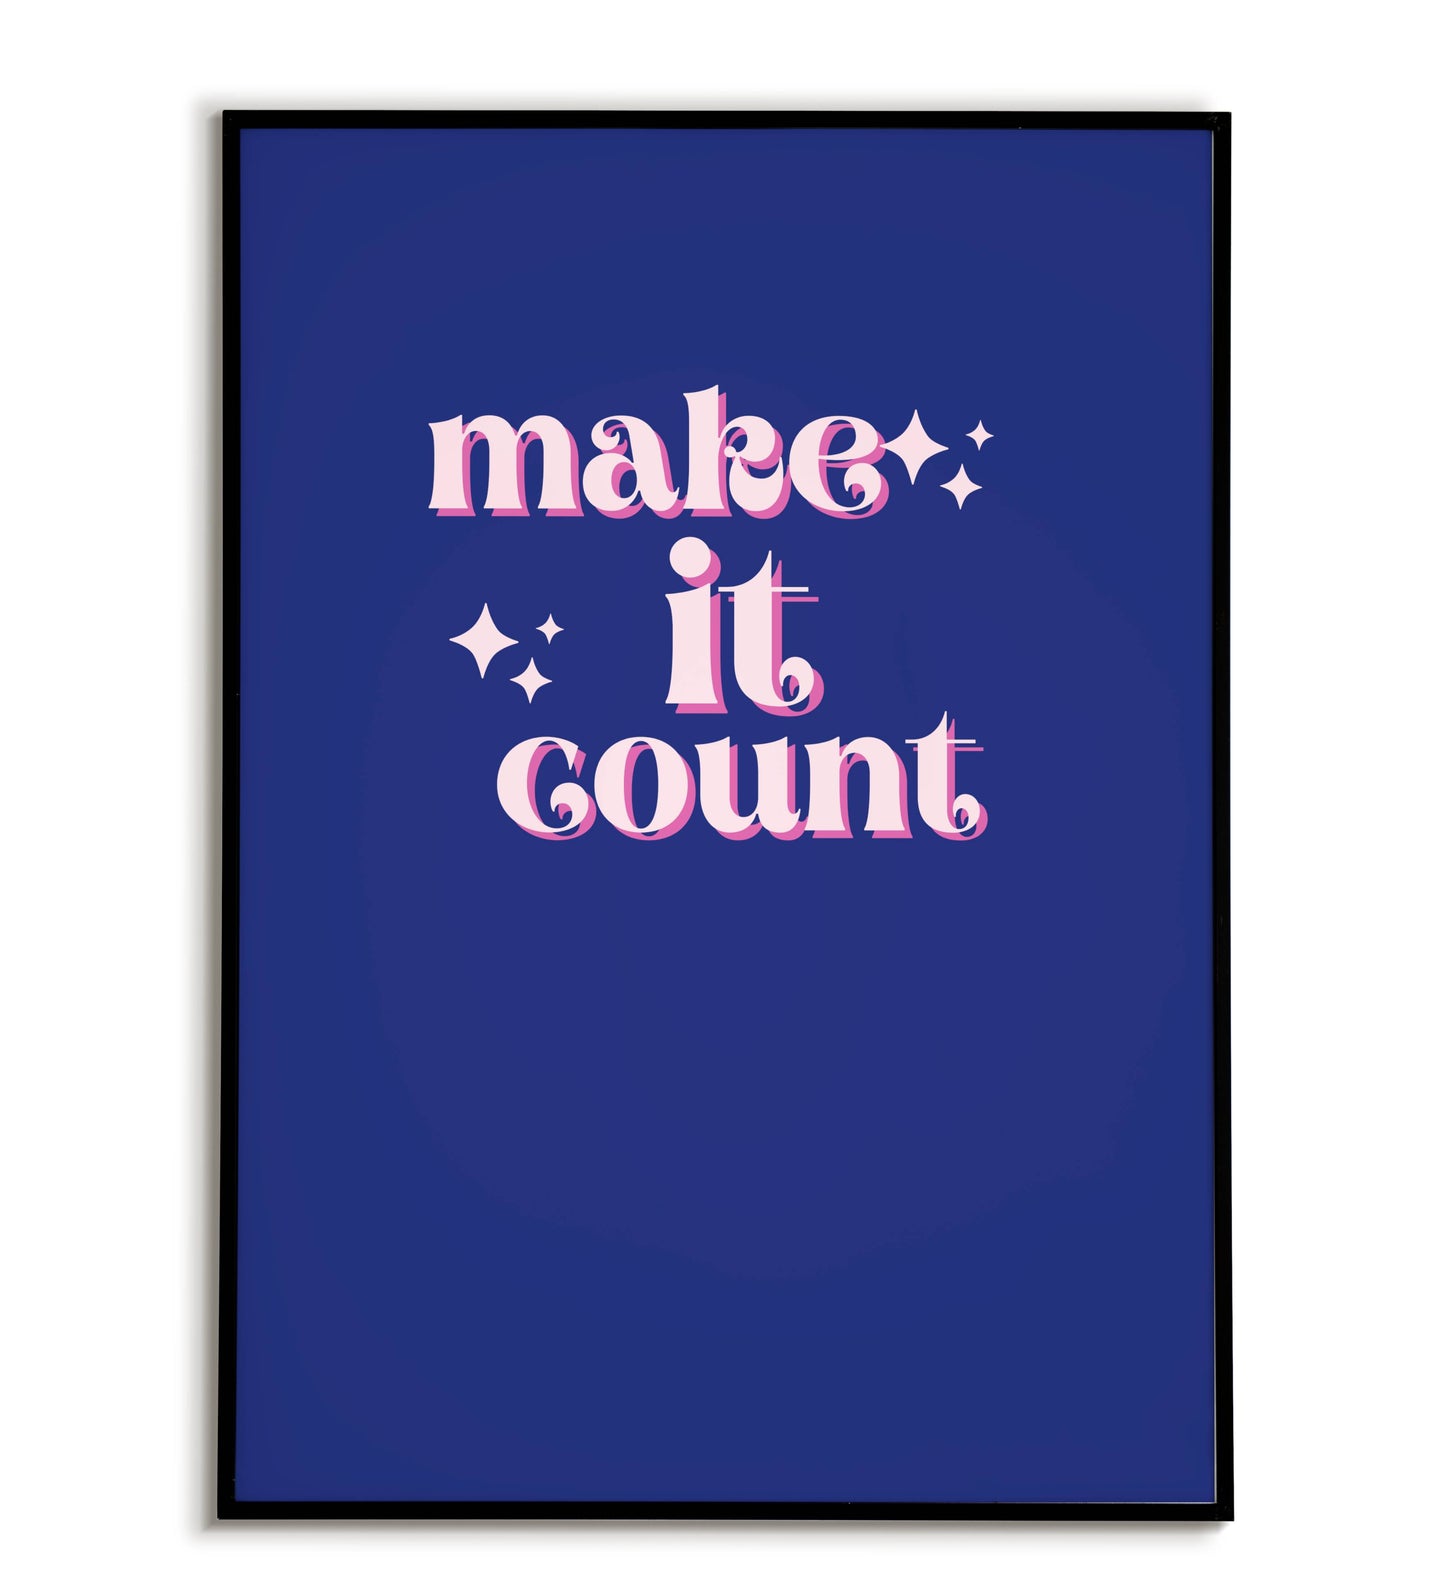 Motivational "Make it count" printable poster, encouraging living life to the fullest.	